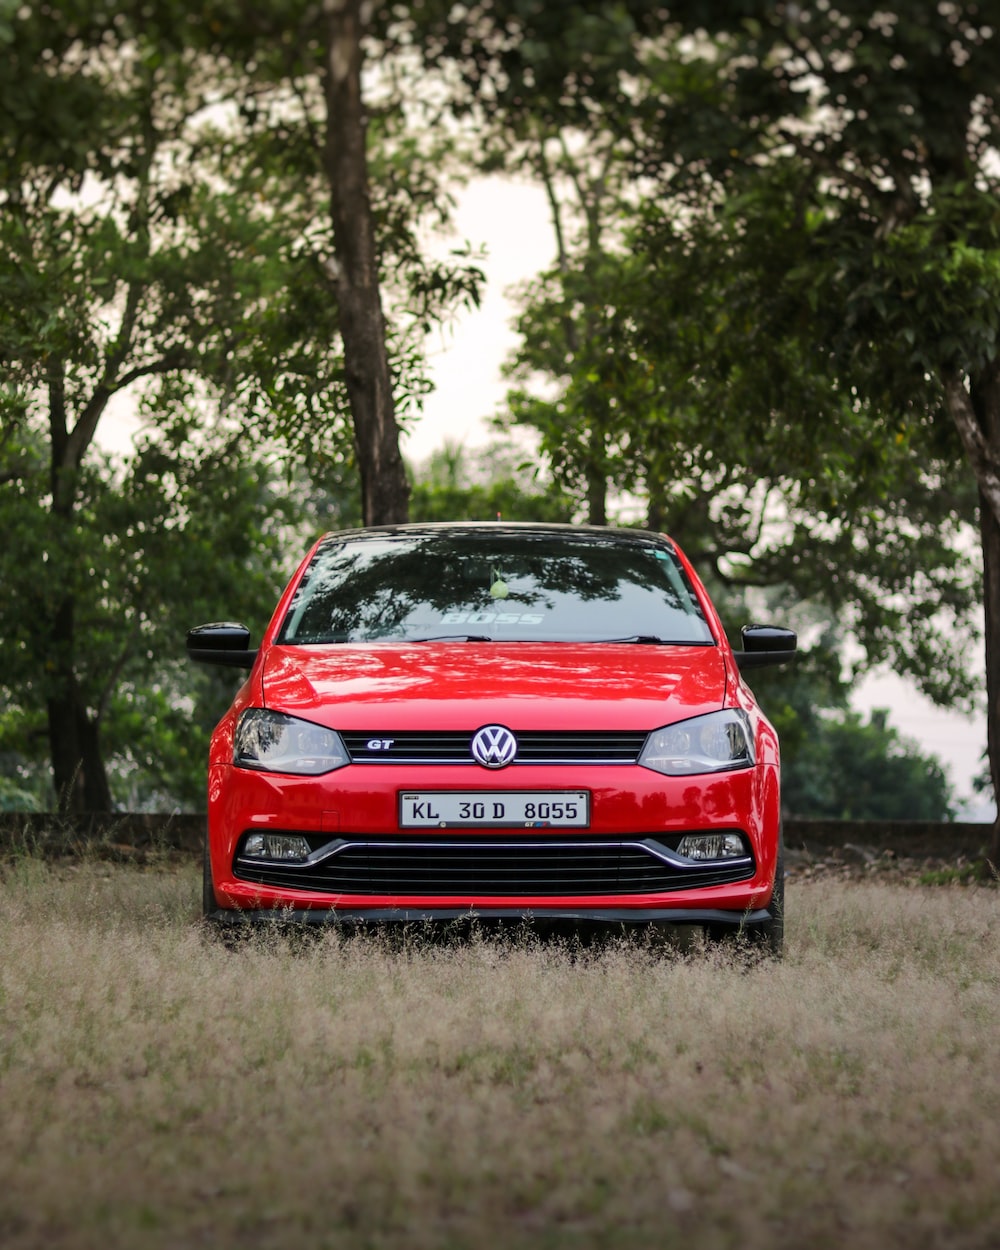 Volkswagen polo pictures download free images on